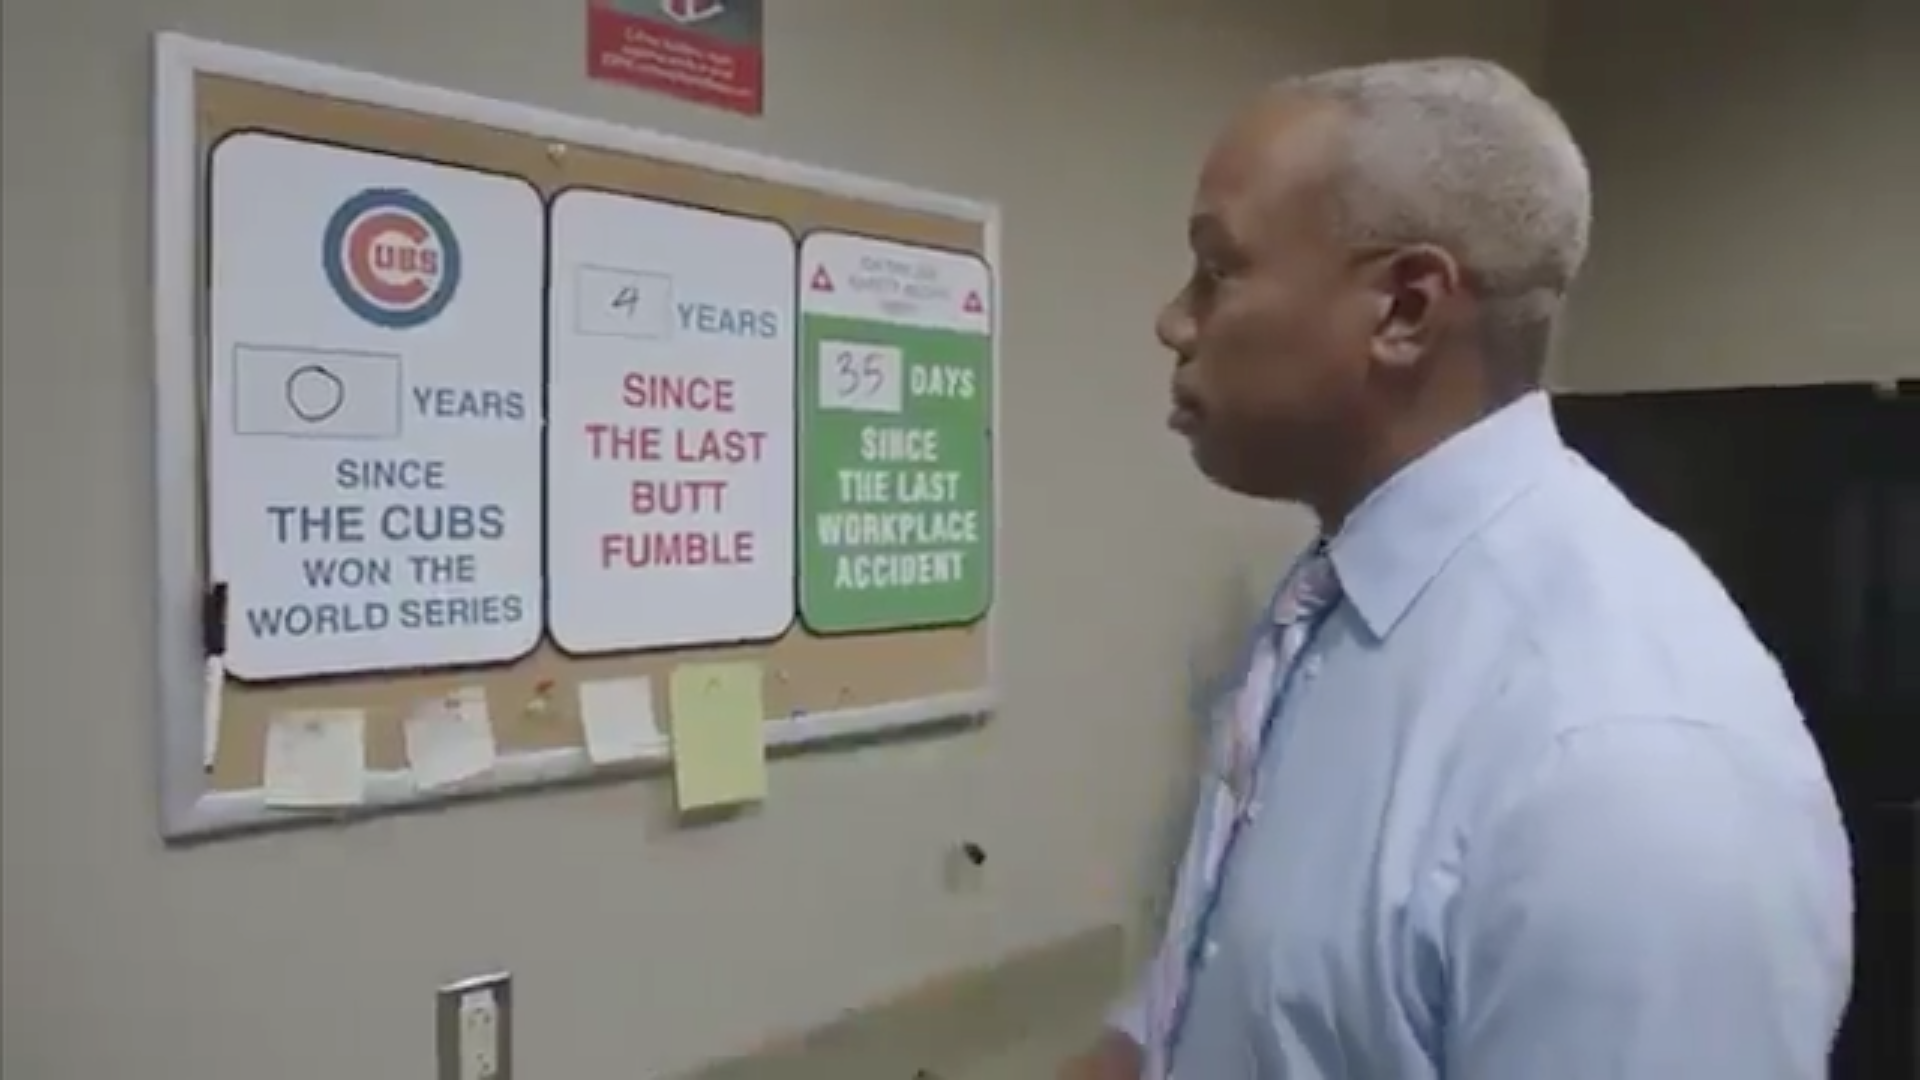 A SportsCenter commercial honoring the Cubs after their World Series win.